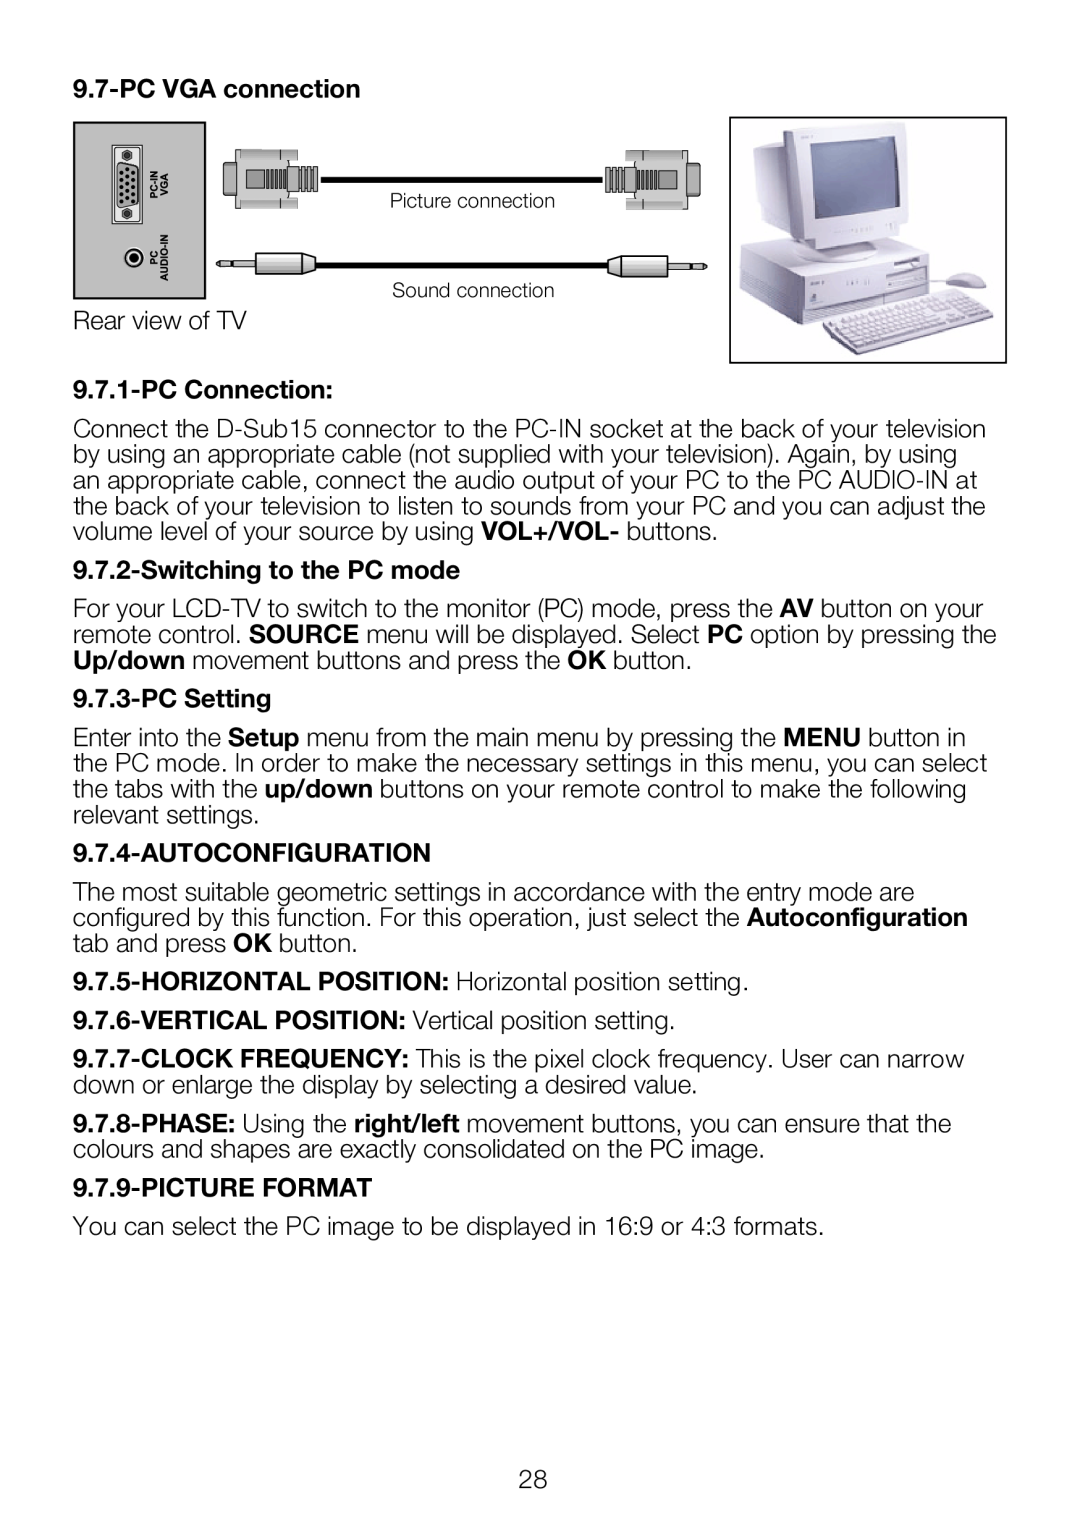 Beko 37WLU550FHID manual PC VGA connection, PC Connection, Switching to the PC mode, PC Setting, Autoconfiguration 